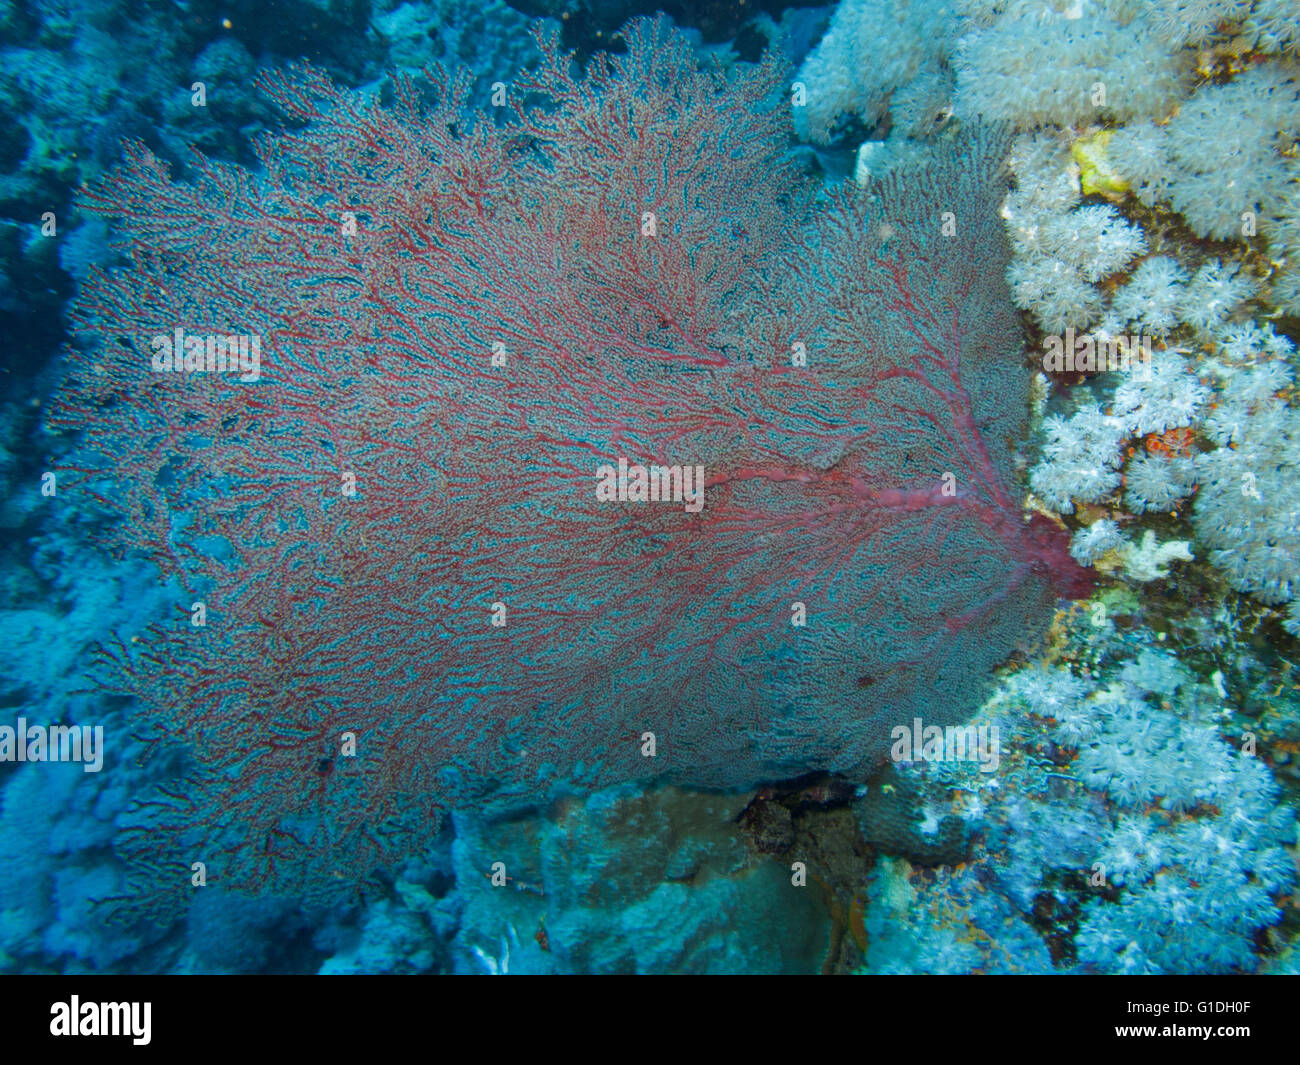 Small Gorgonian sea fan in the coral reef of the Red Sea. Stock Photo